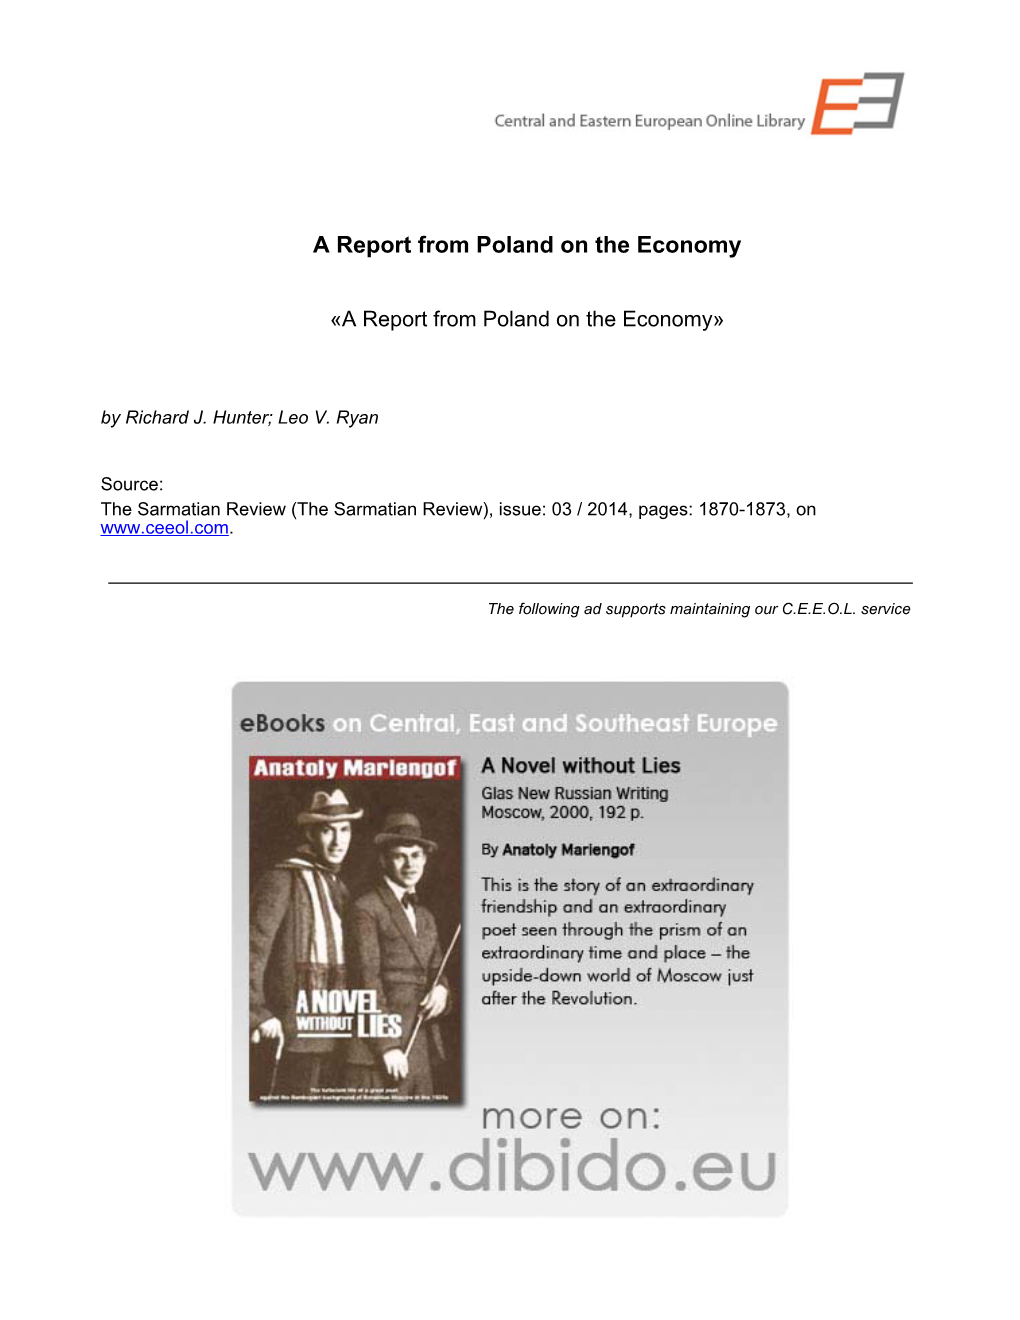 03 / 2014 — a Report from Poland on the Economy